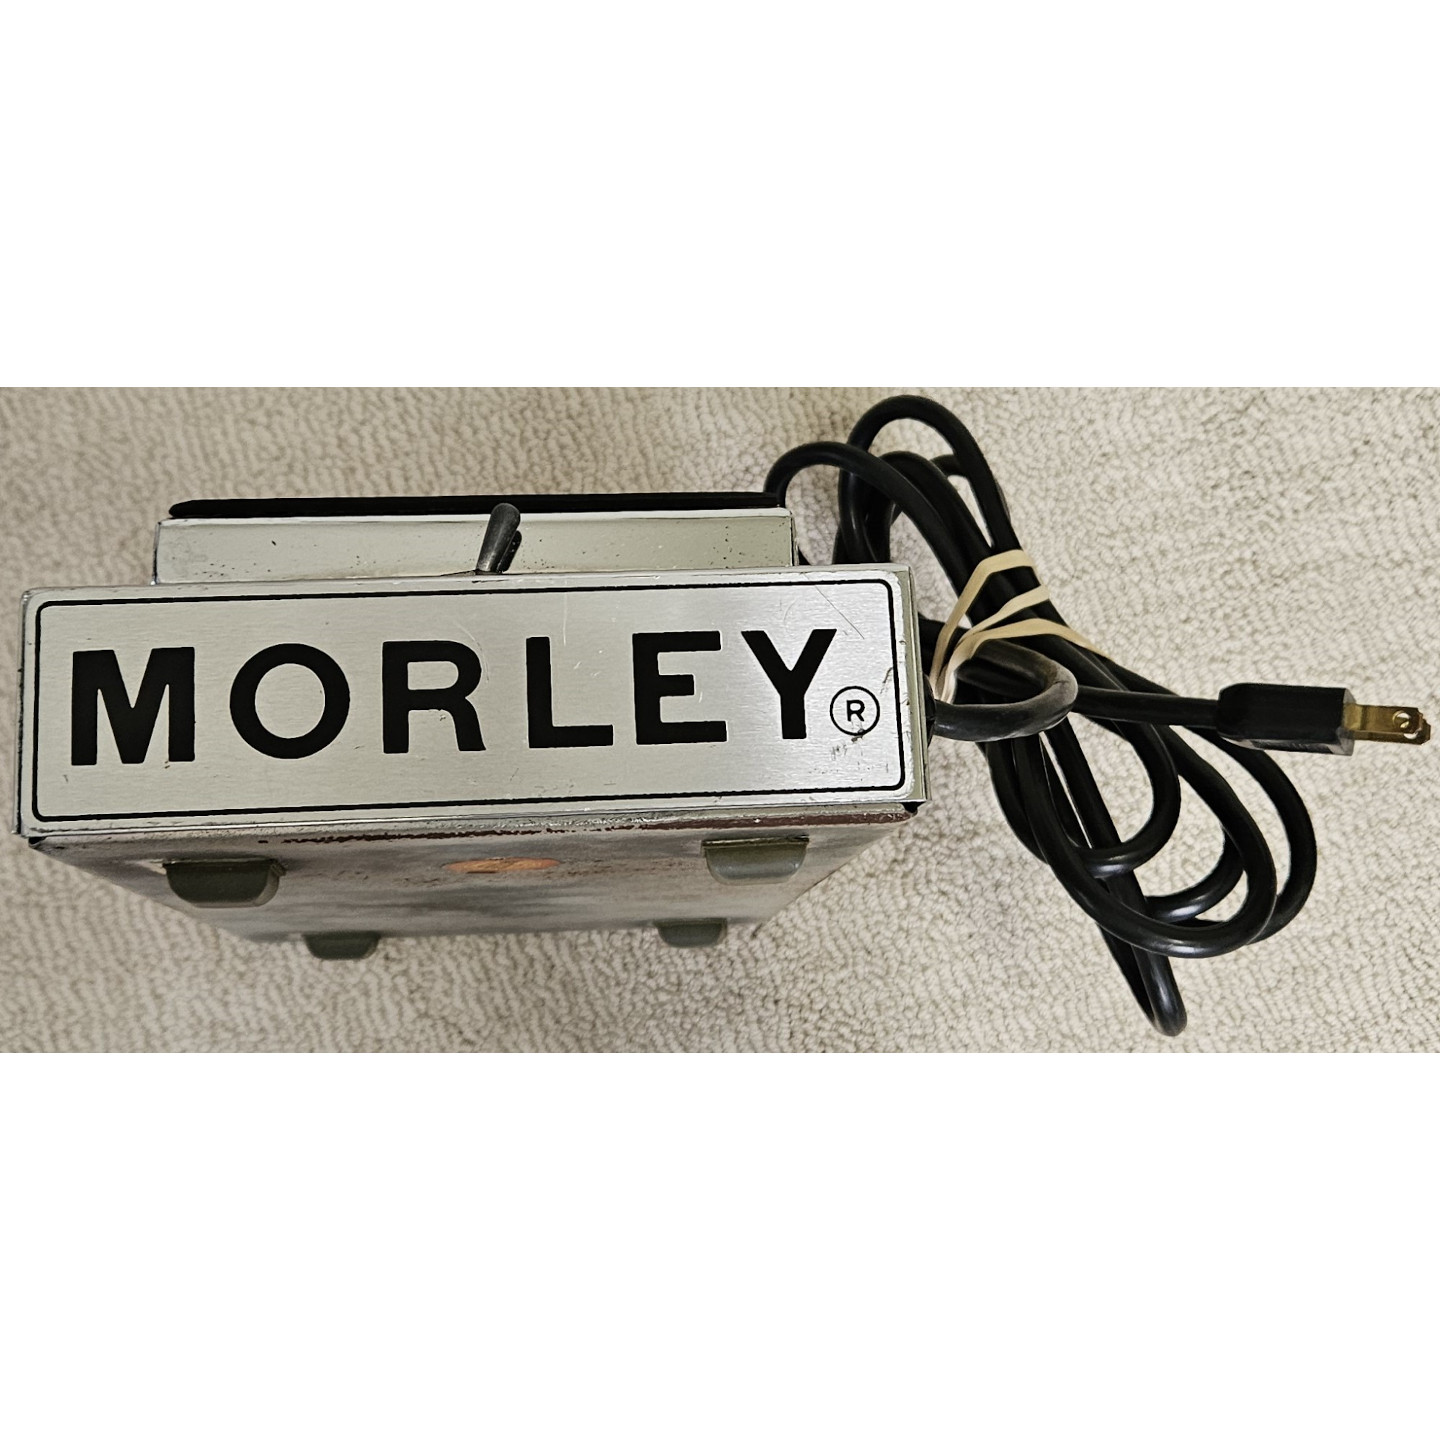 1973 Morley Power Wah Fuzz PWF Silver Vintage Guitar Effects Pedal